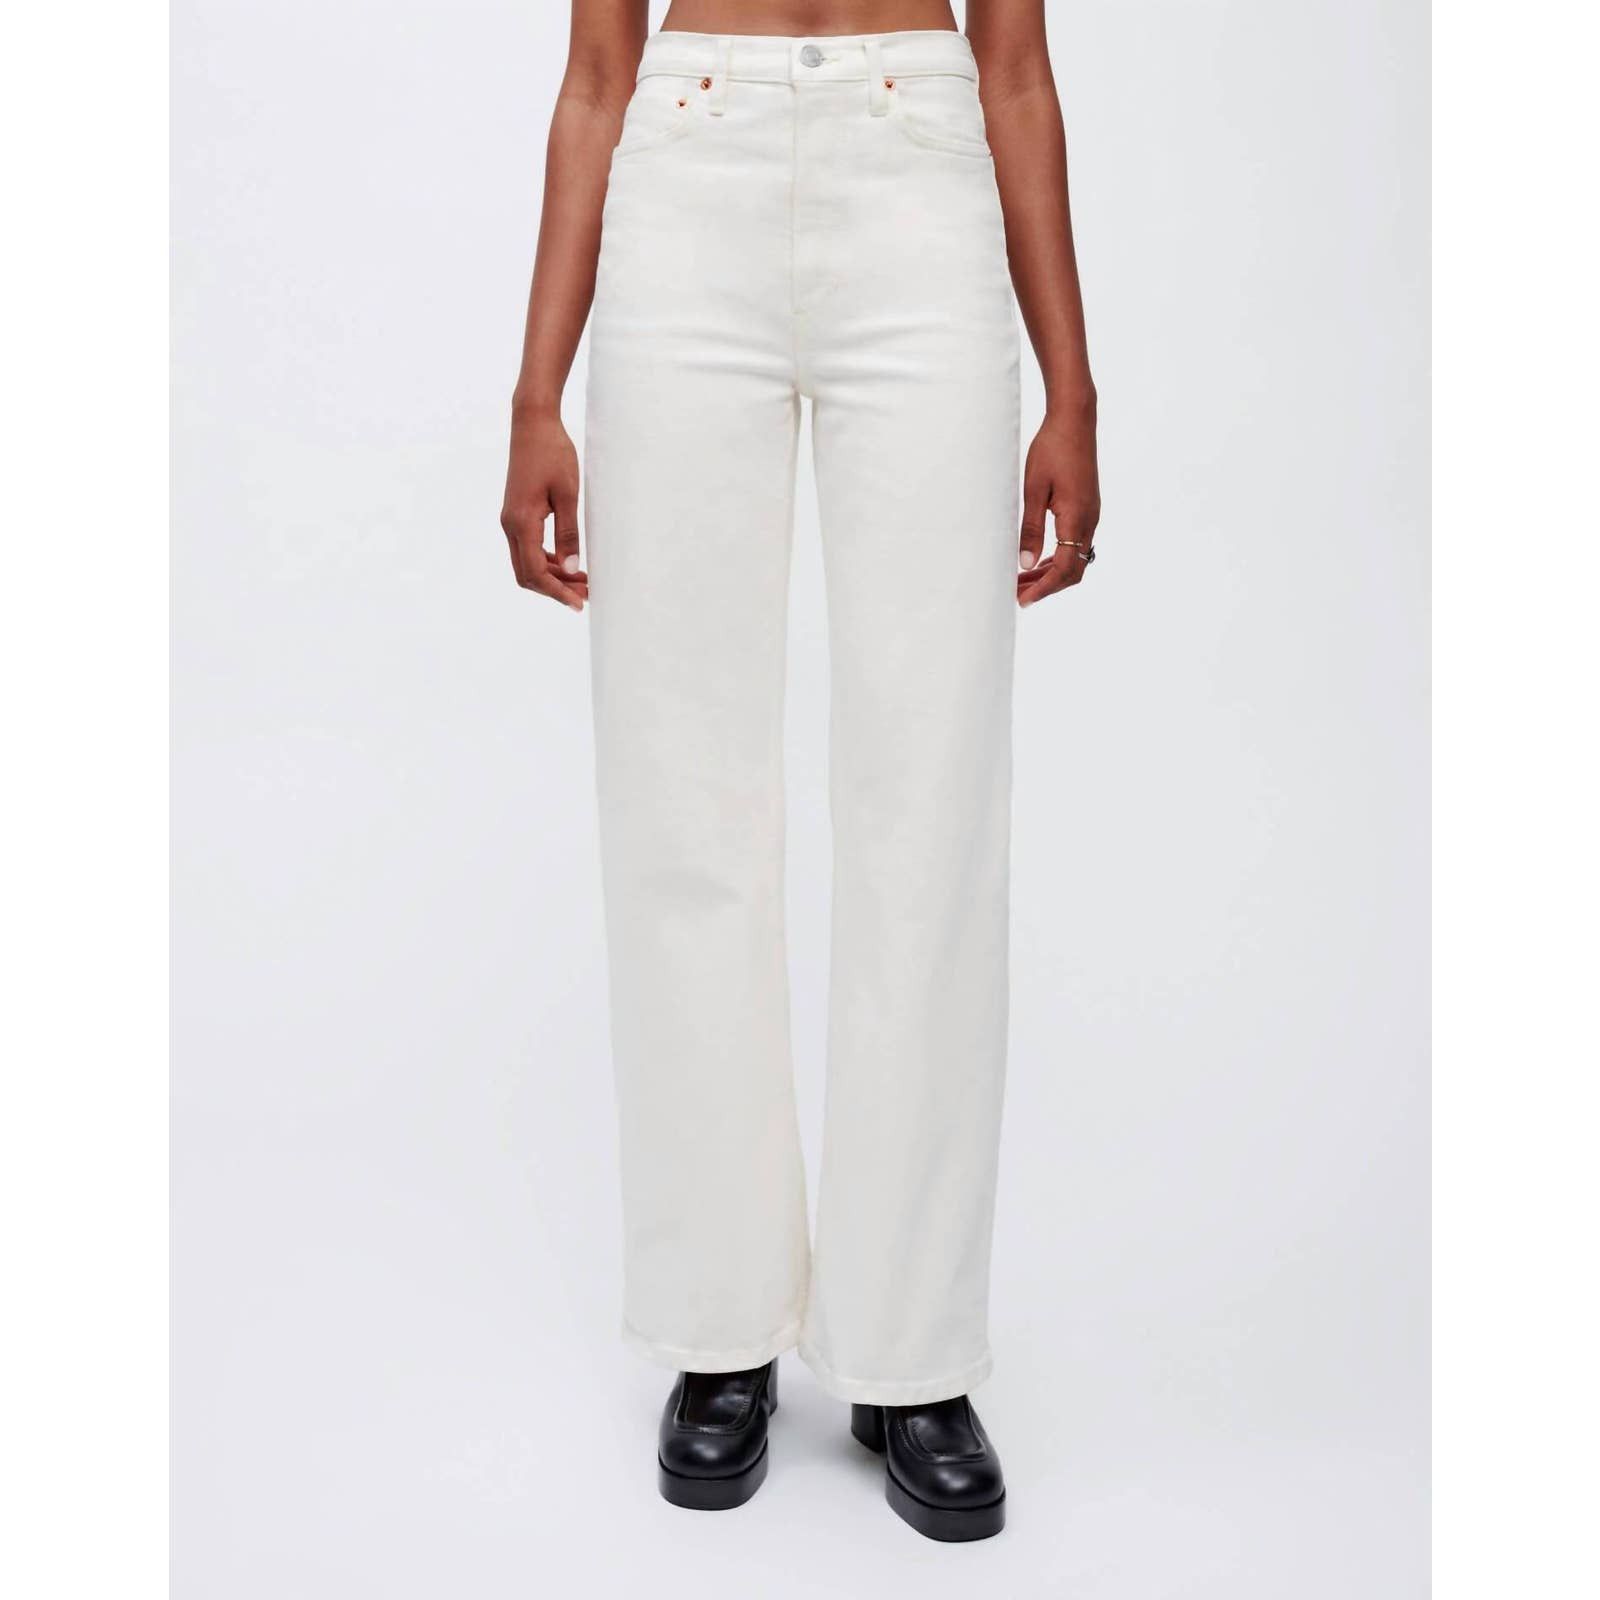 RE/DONE 70S High Rise Skinny Bootcut Jeans in Vintage White